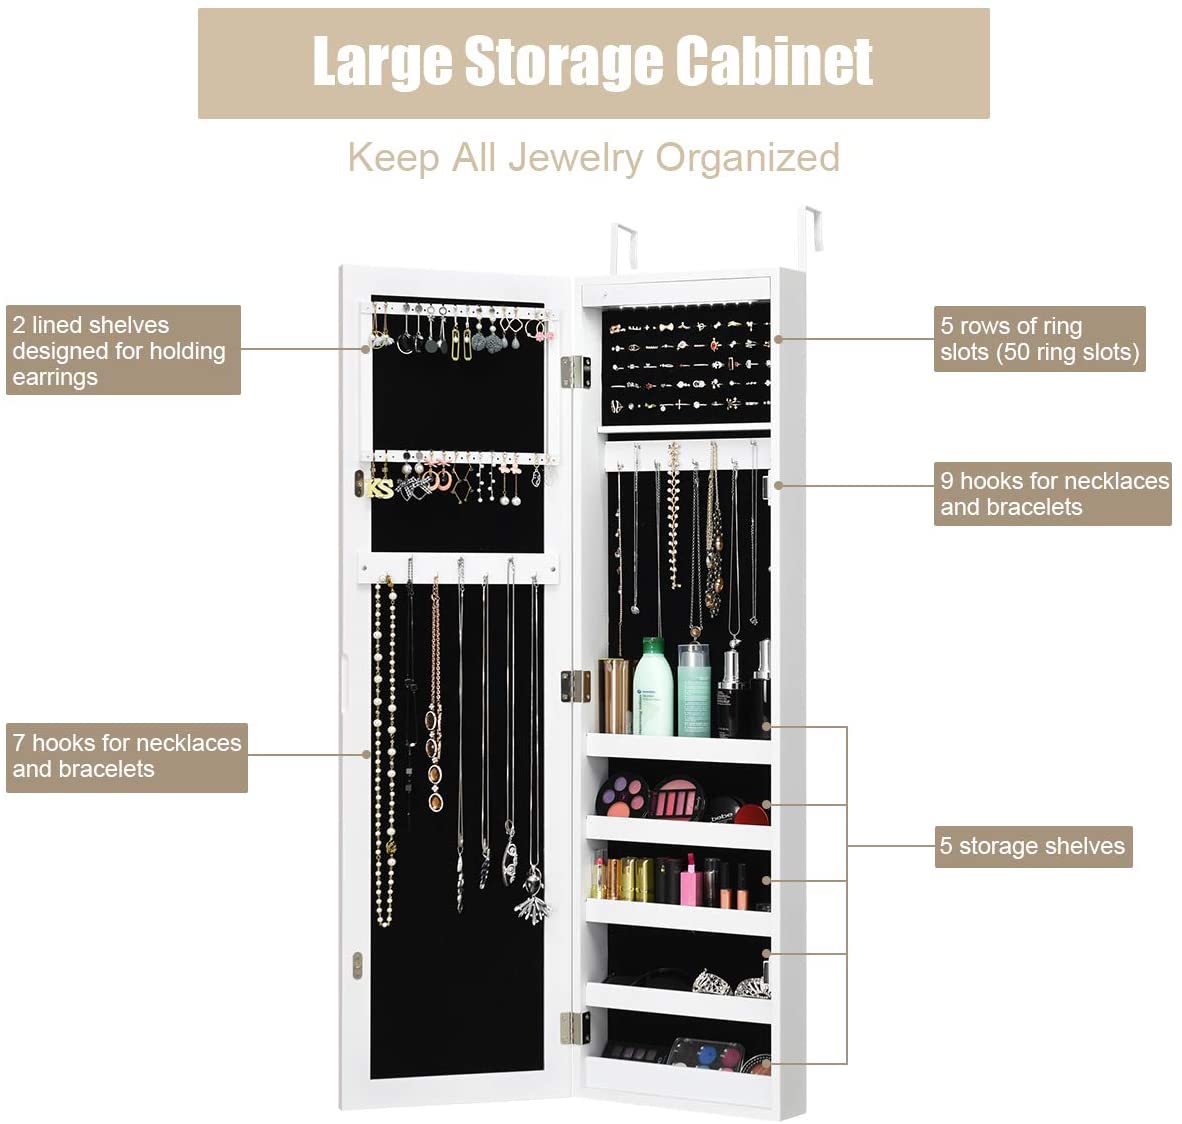 Giantex | 12 LEDs Wall Mounted Jewelry Armoire Cabinet with Mirror